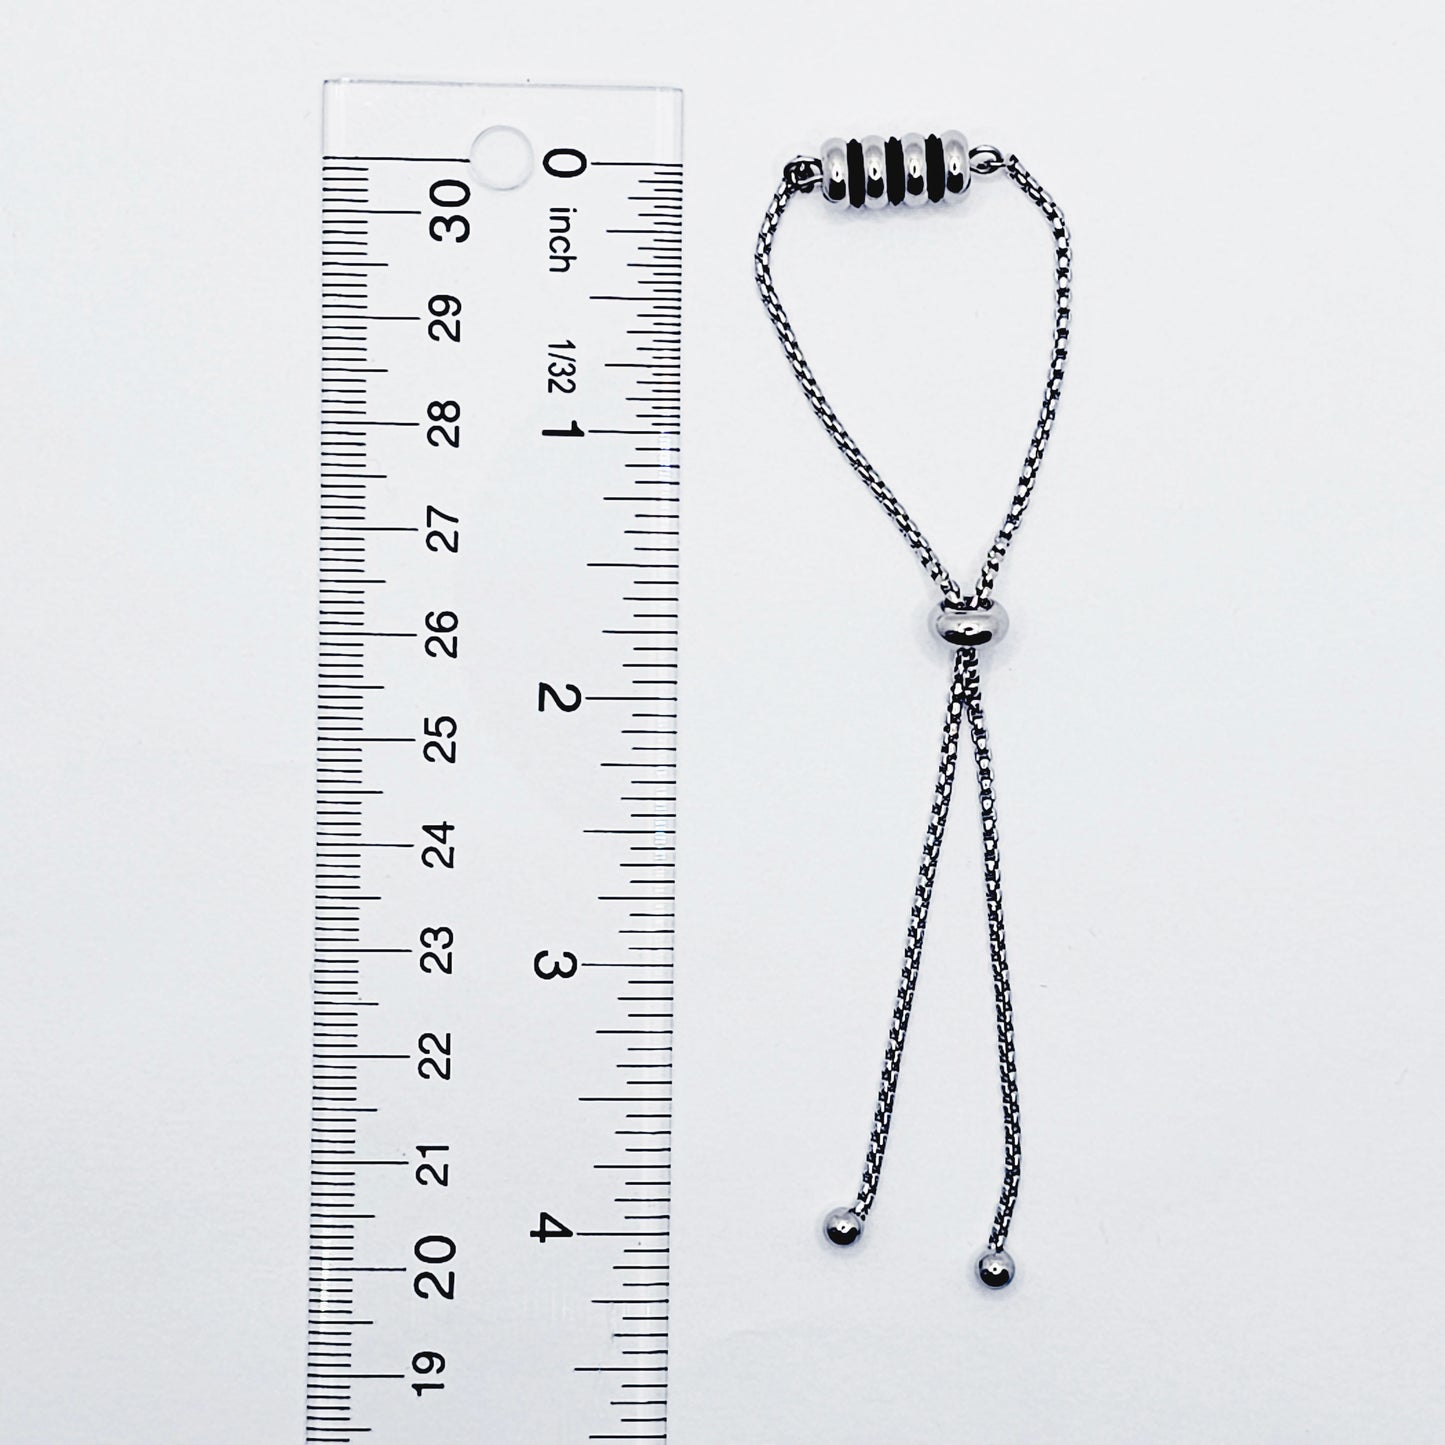 Penis Chain Noose Bracelet with Ribbed Rolling Barrel. Non-Piercing Genital Jewelry for Men